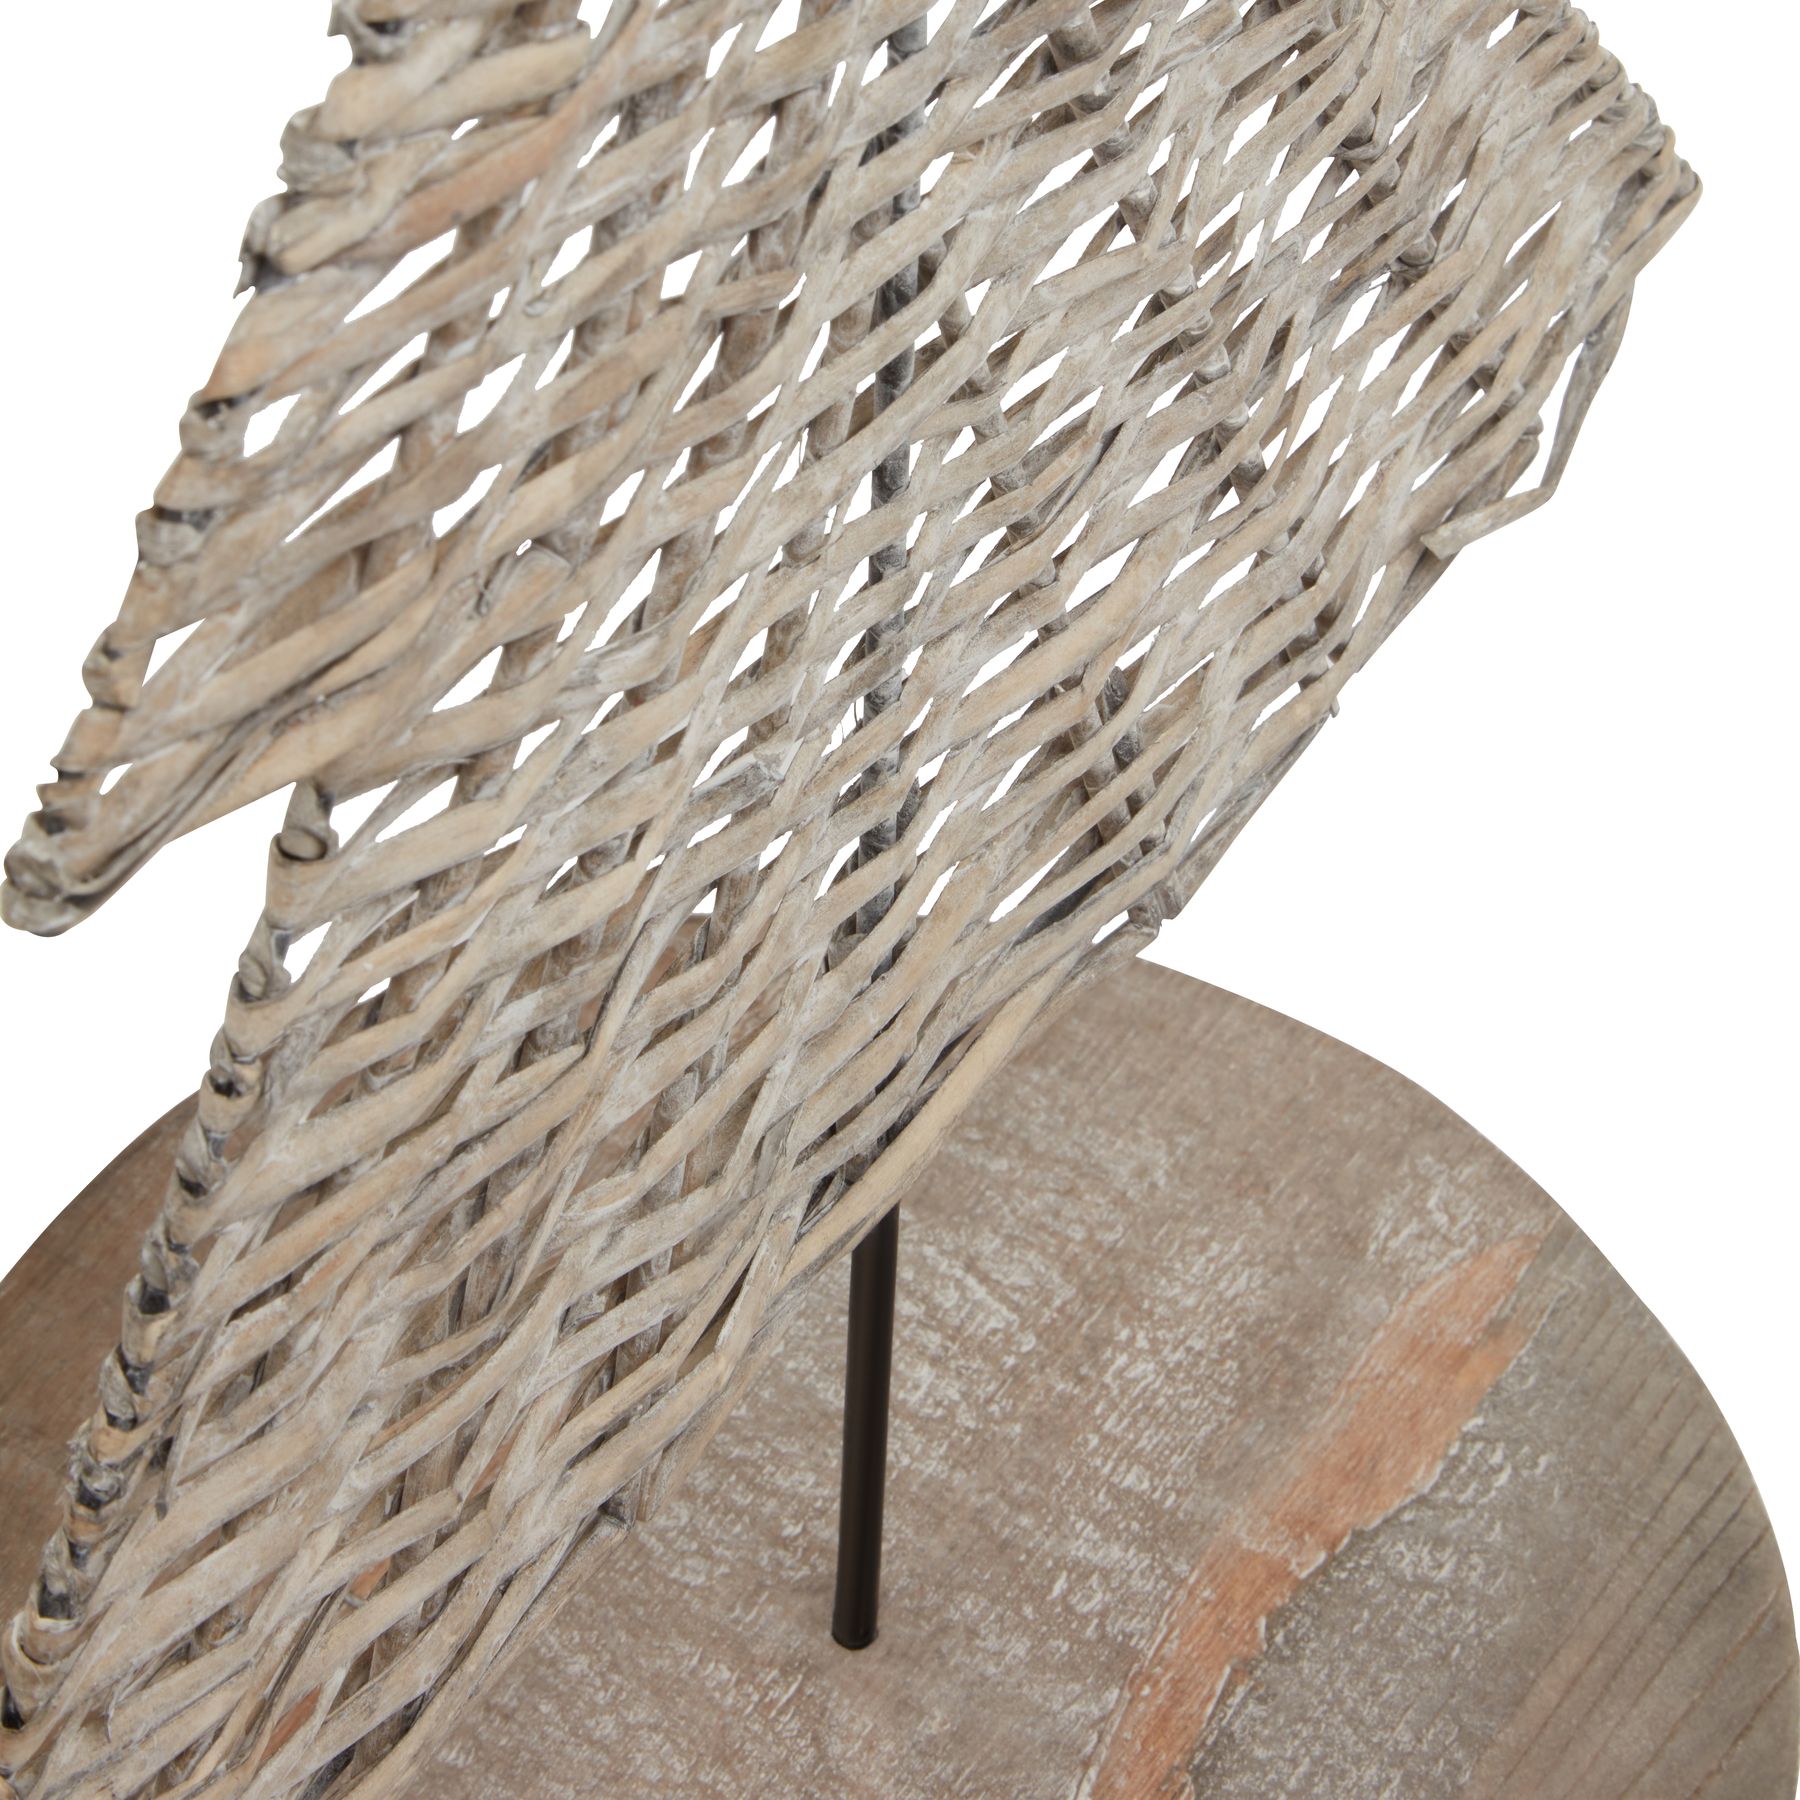 The Noel Collection Large Wicker Tree Ornament - Image 3